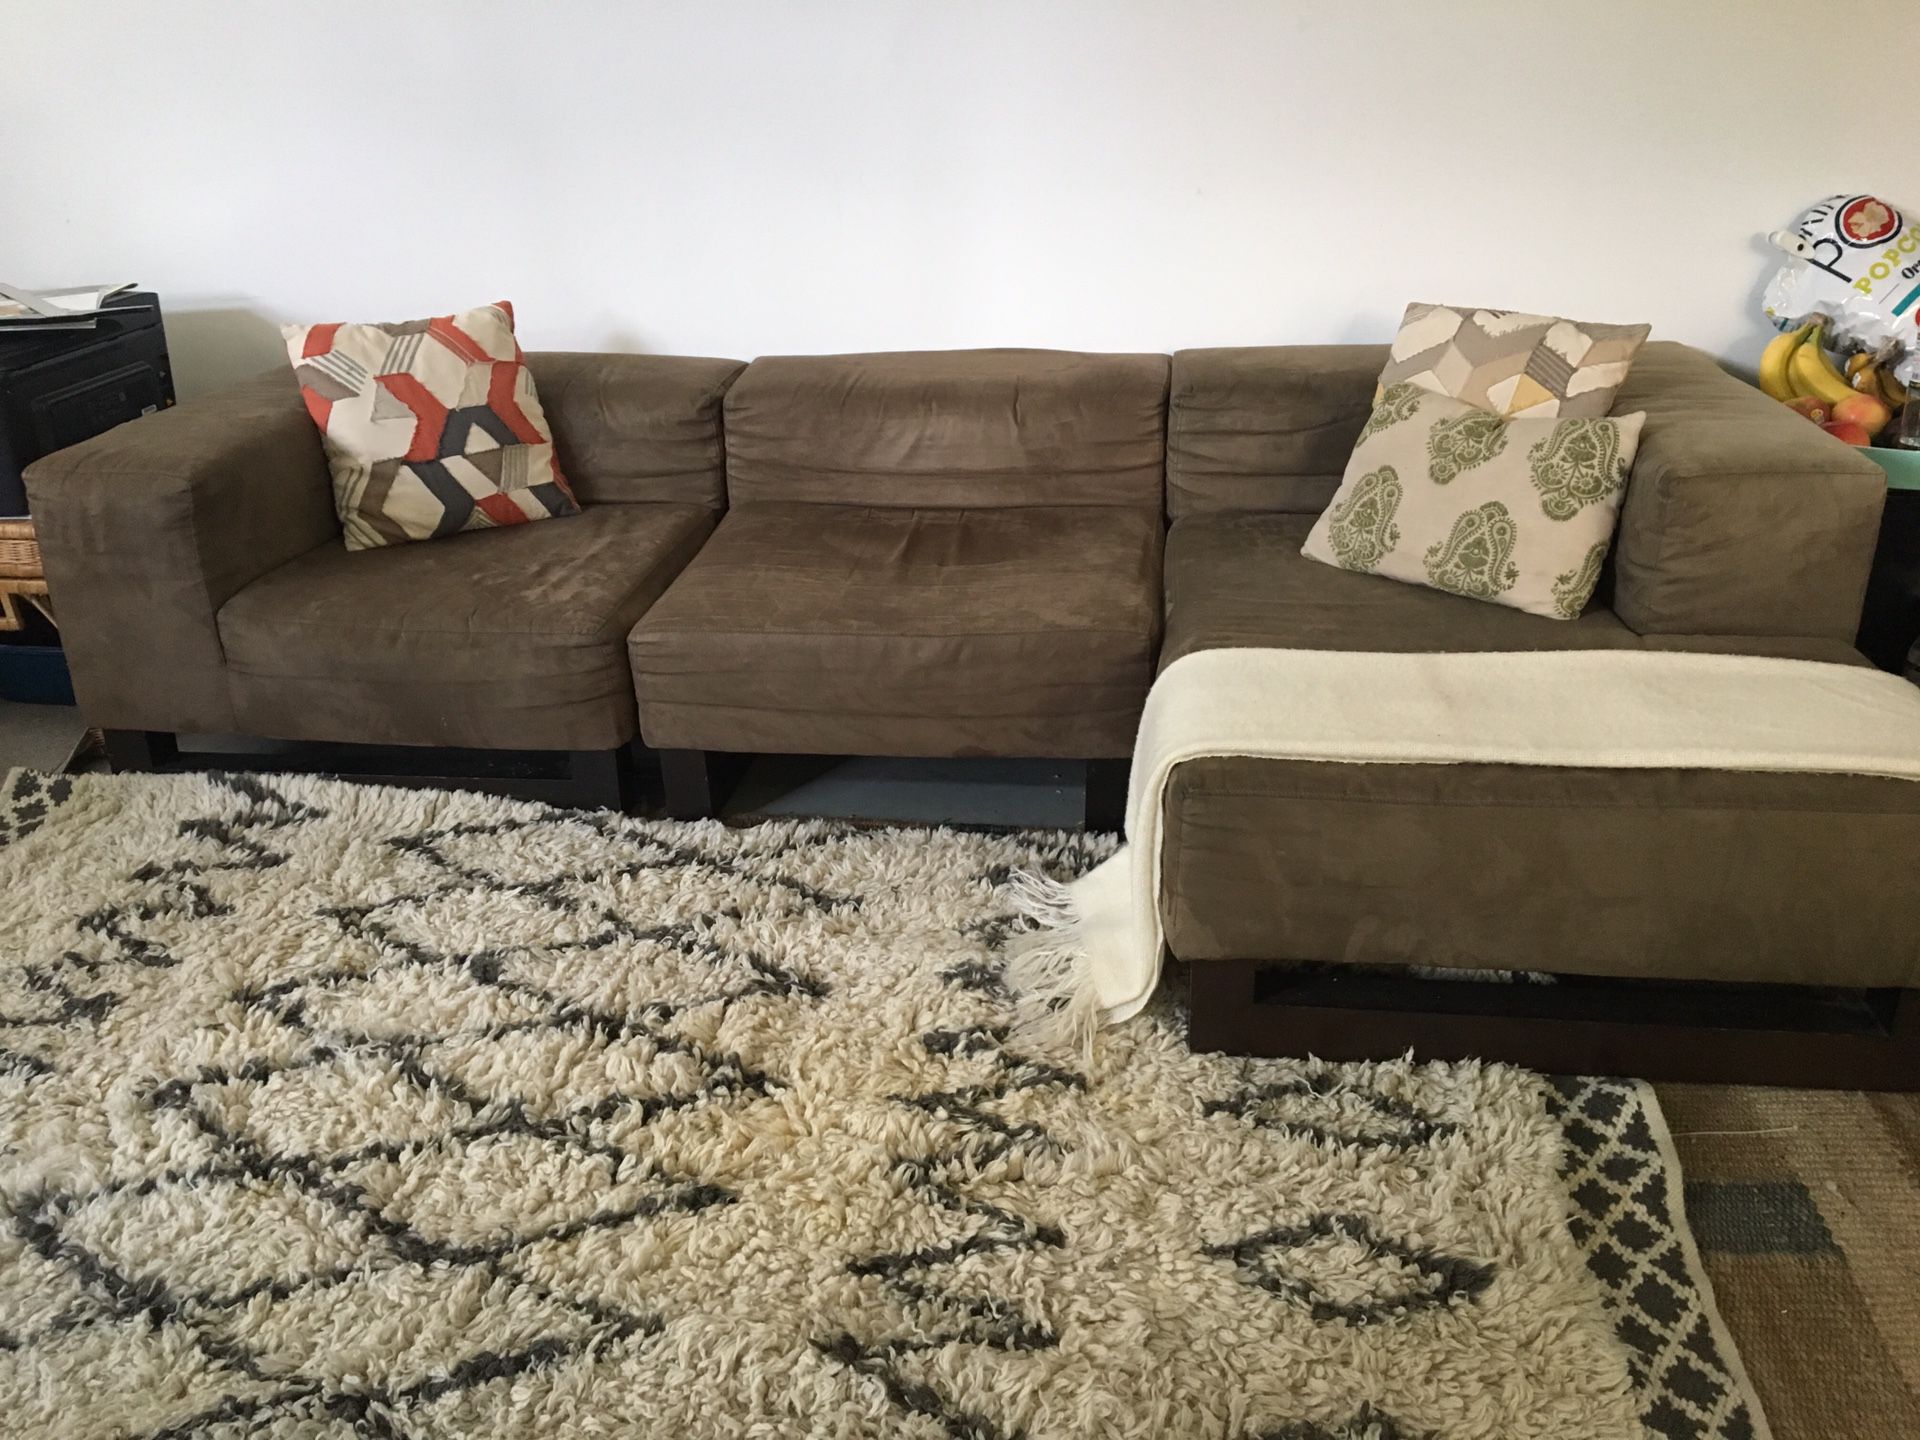 West elm sectional couch